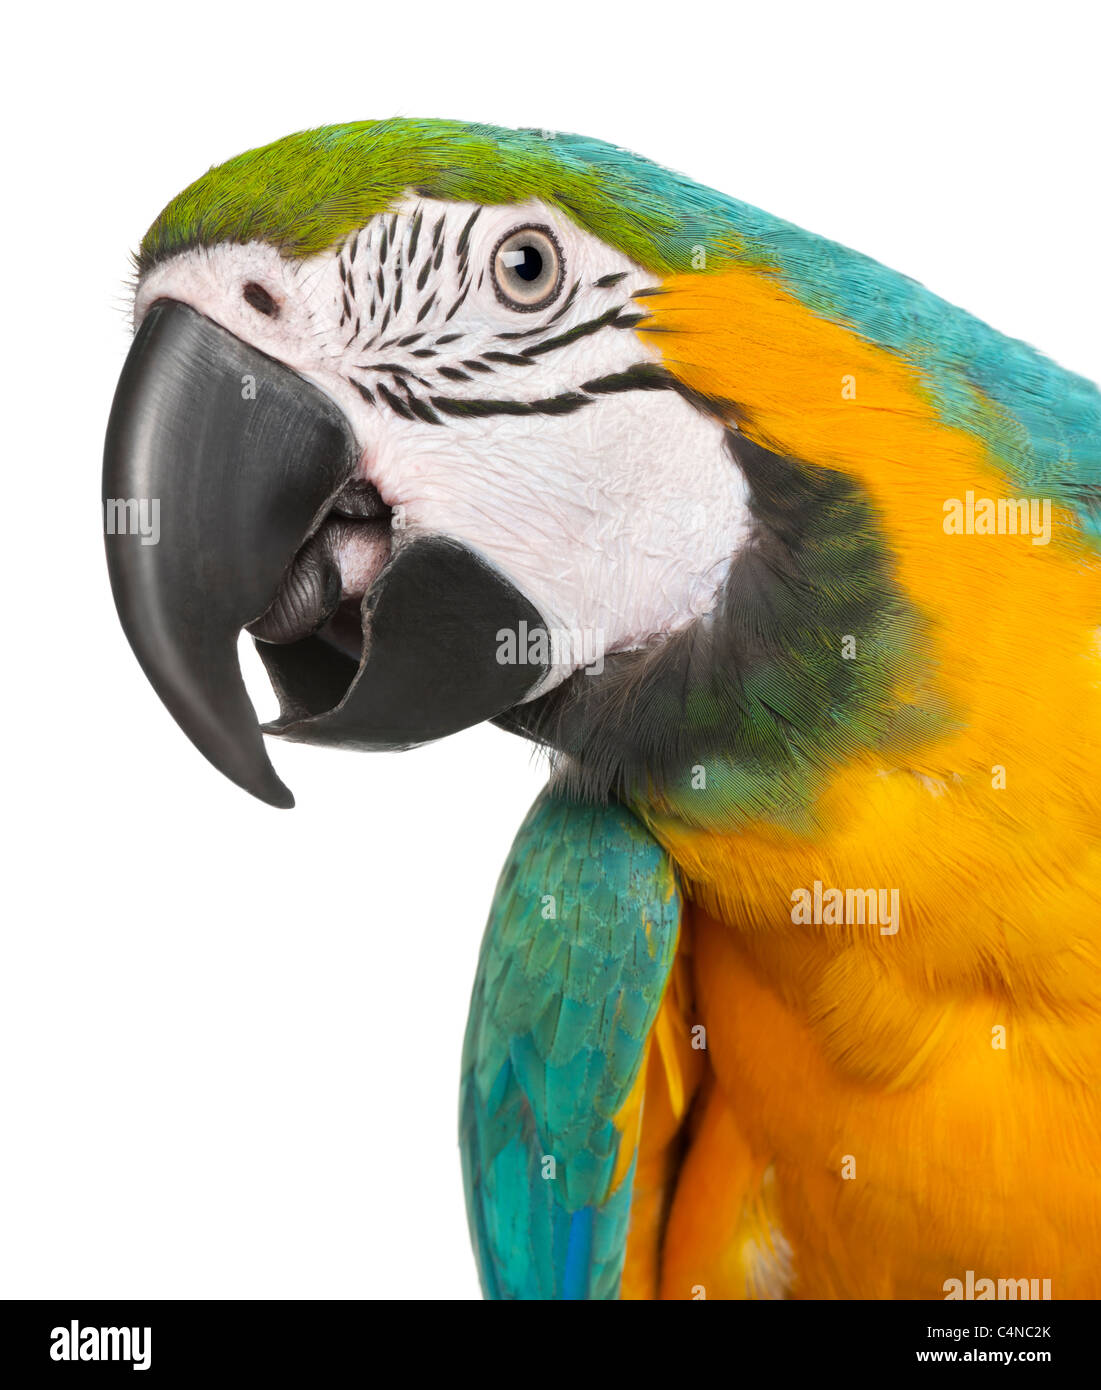 Close-up of Blue-and-Yellow Macaw, Ara ararauna, 16 months old, in front of white background Stock Photo